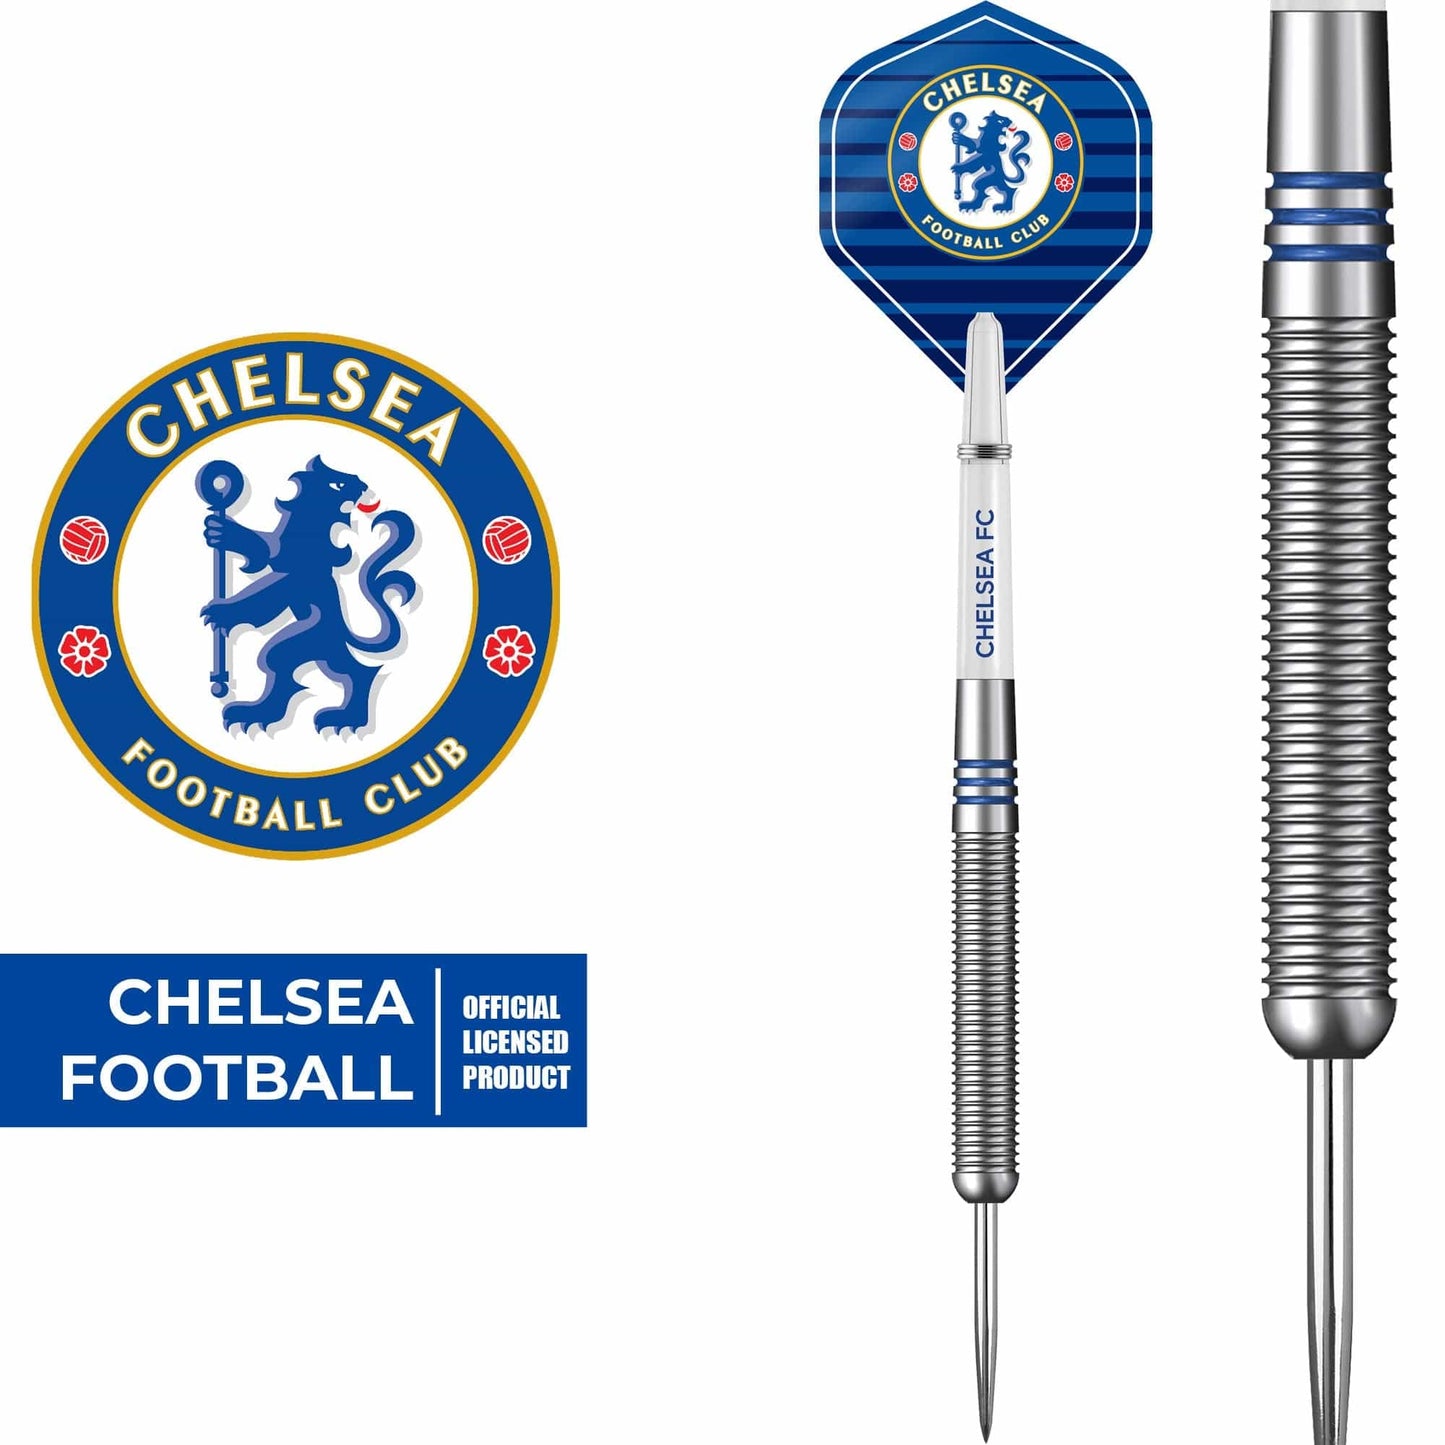 Chelsea Football Darts - Steel Tip Tungsten - Official Licensed - Chelsea FC - 24g 24g